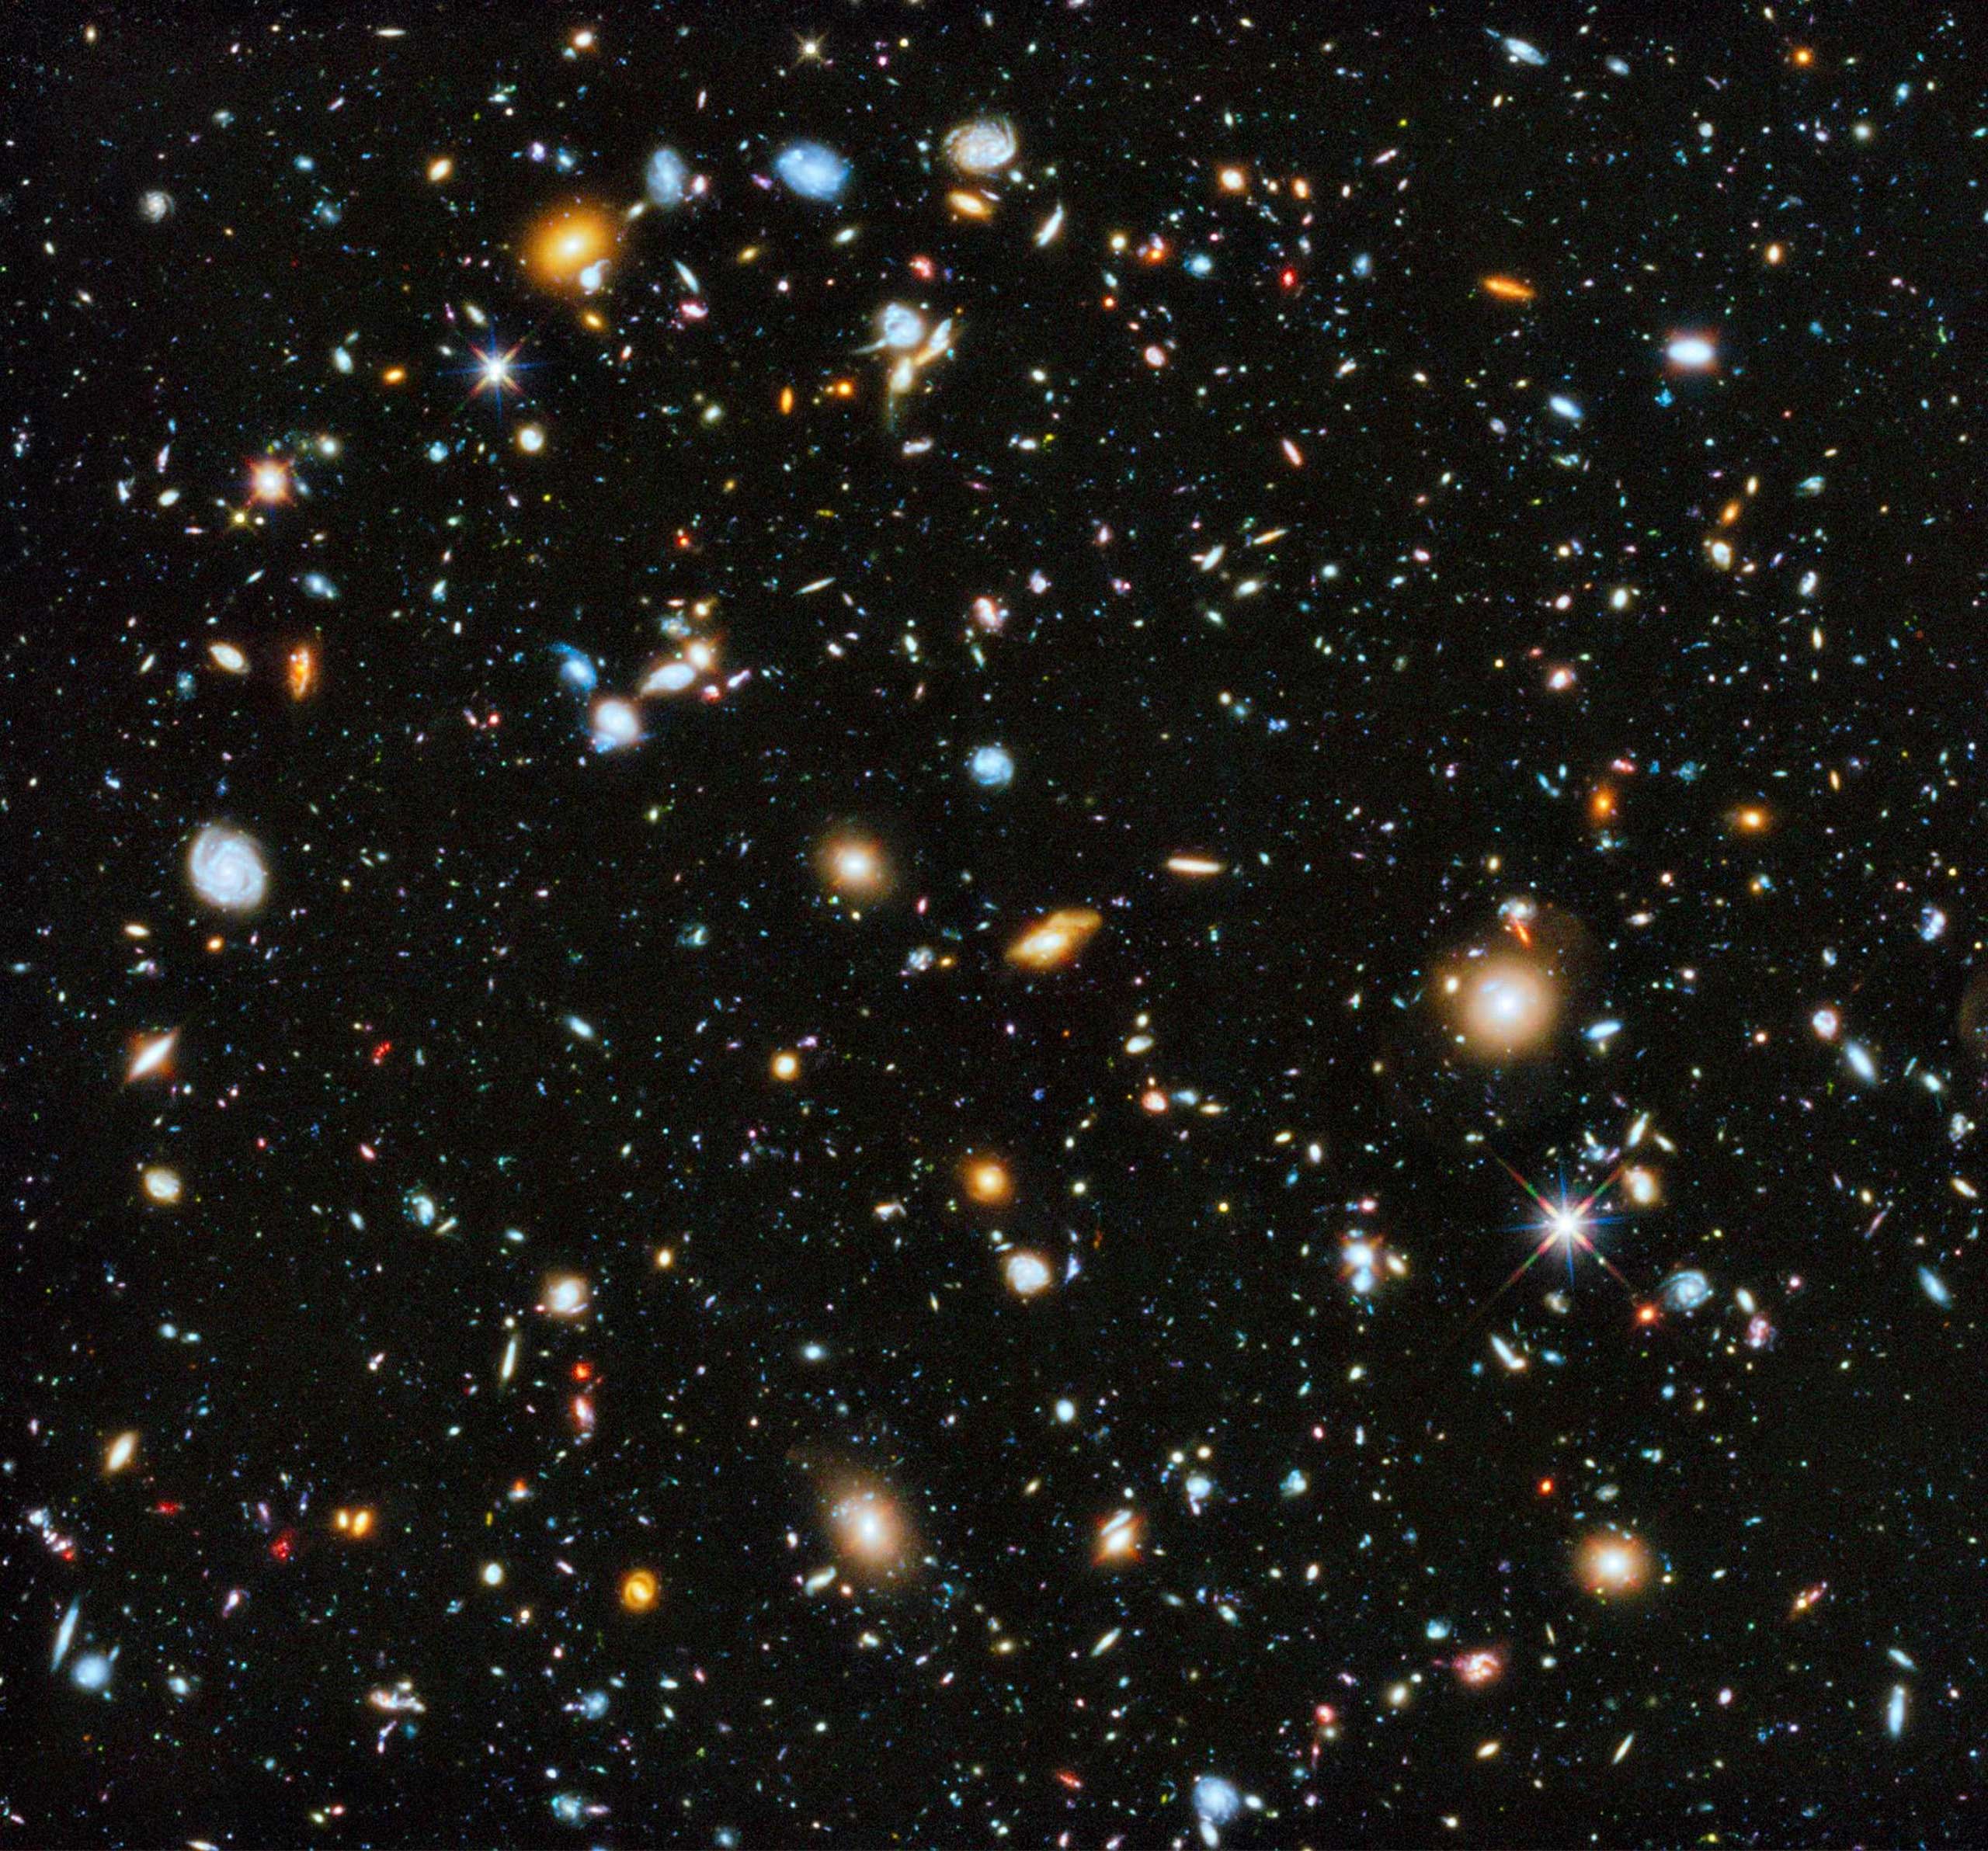 A composite of separate exposures taken in 2003 to 2012 with Hubble's Advanced Camera for Surveys and Wide Field Camera 3 of the evolving universe is shown in this image released on June 3, 2014.